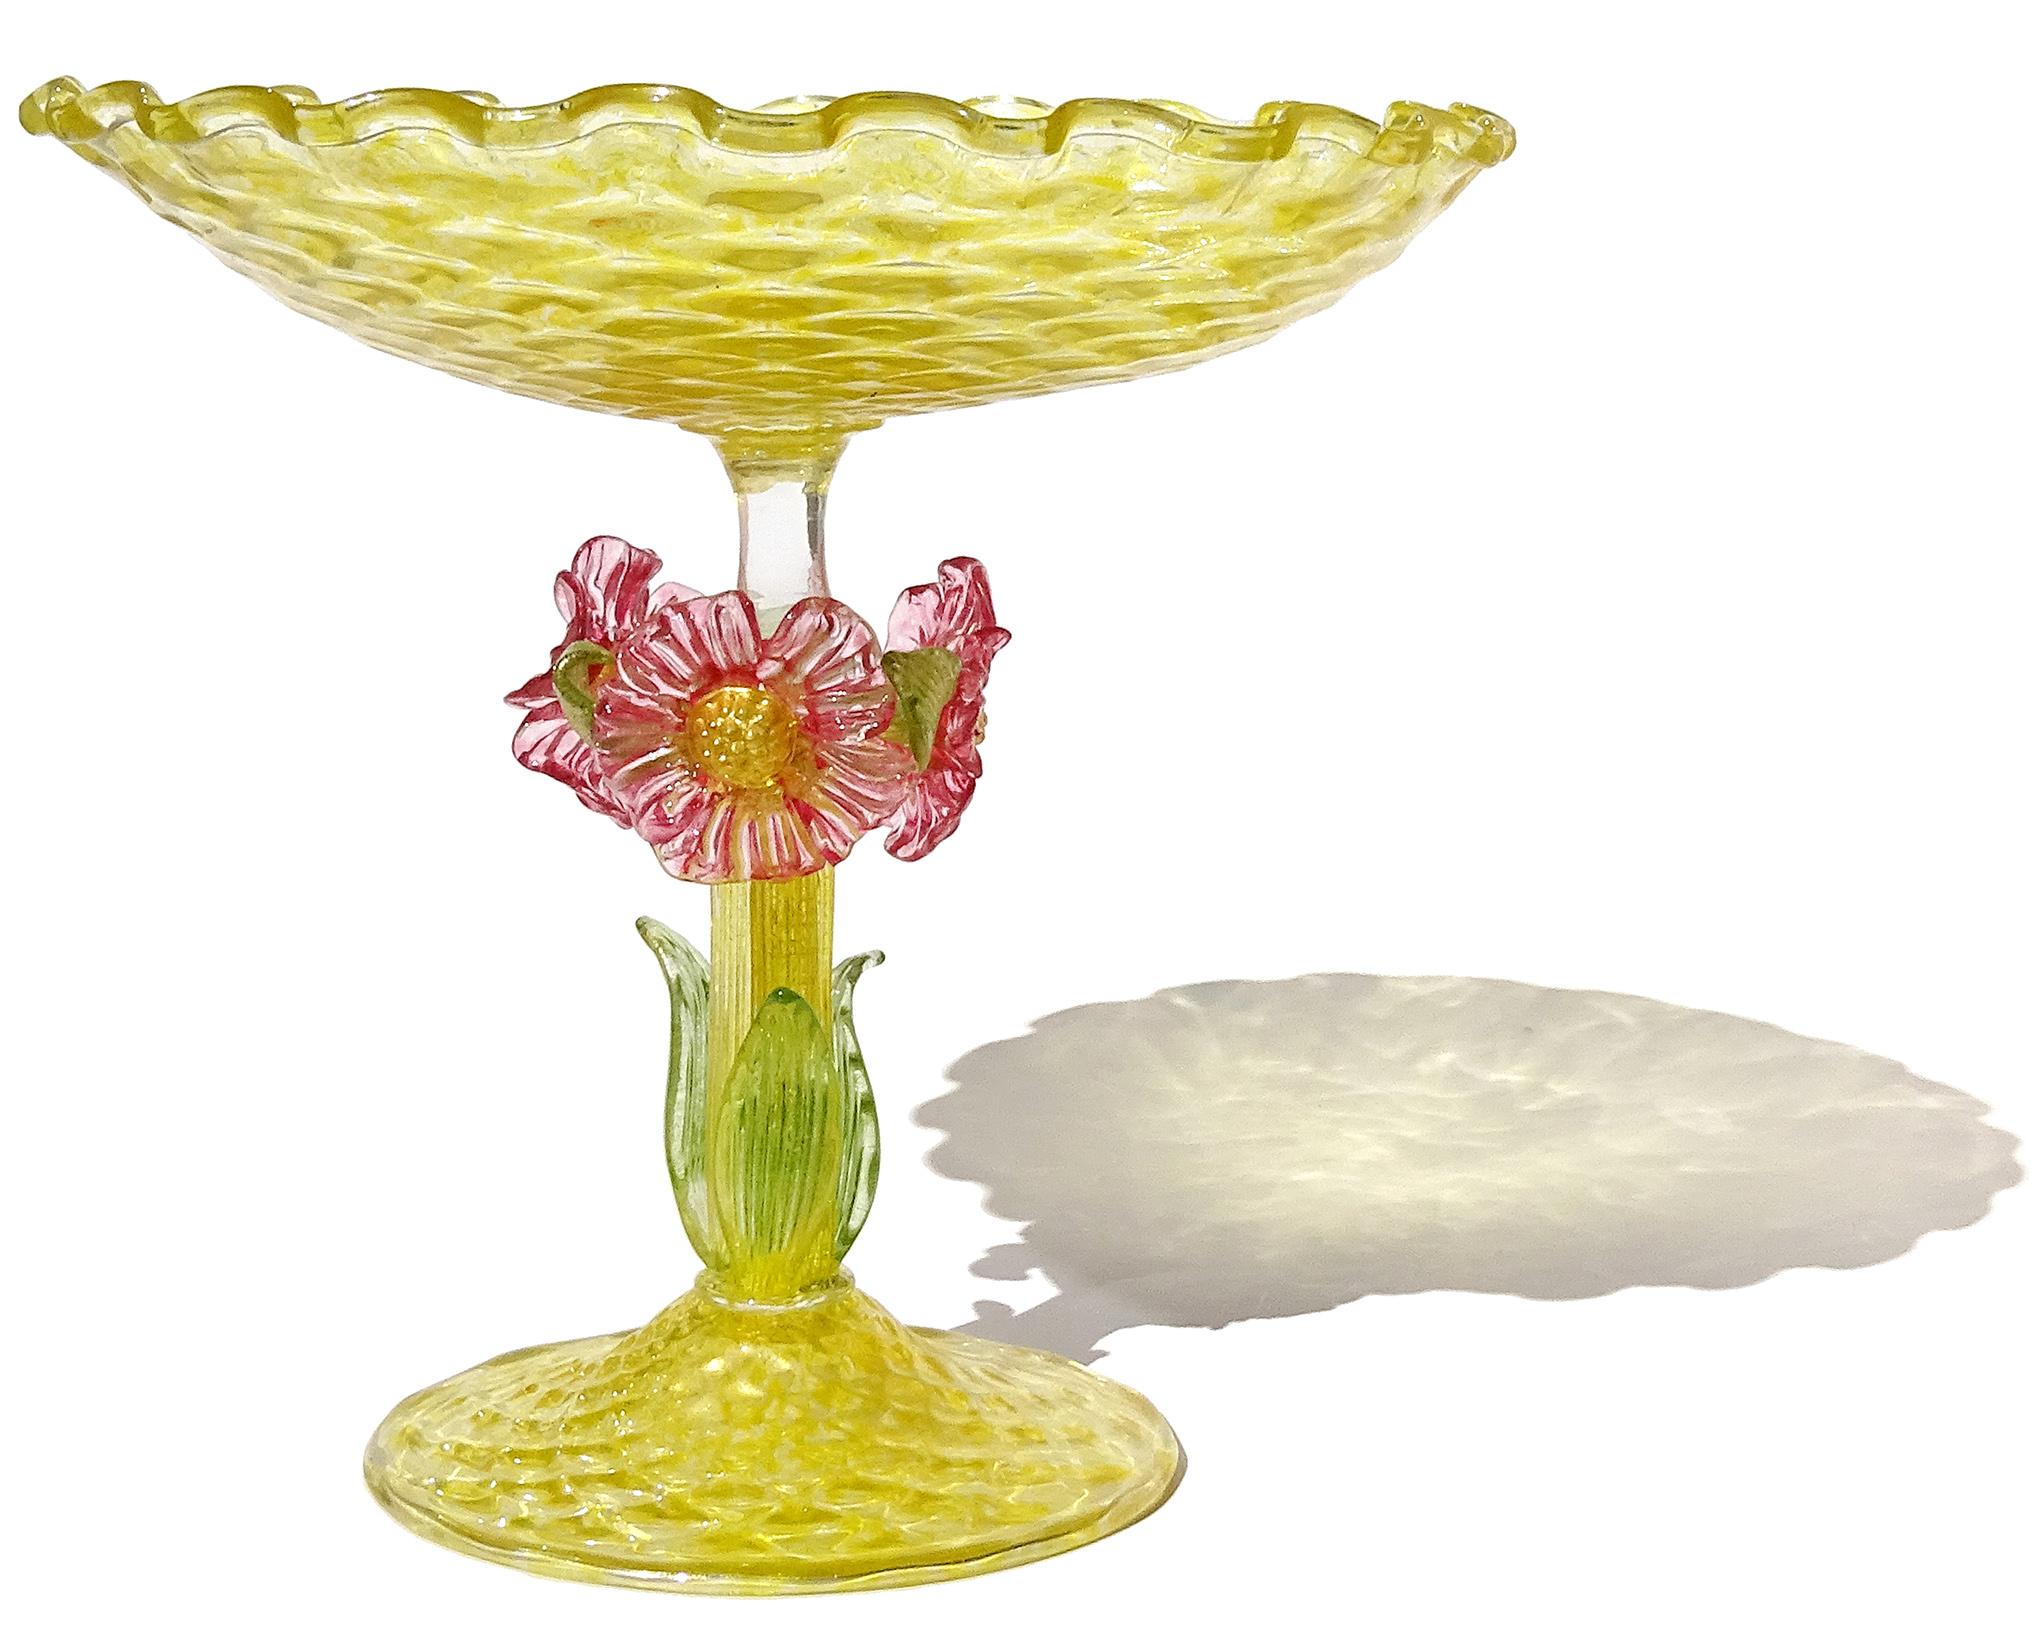 Gorgeous, large antique Venetian hand blown yellow quilted surface Italian art glass footed tazza / compote bowl. The piece is created in the manner of the Italian companies Salviati and Fratelli Toso, circa 1900s. The stem of the bowl has 3 large